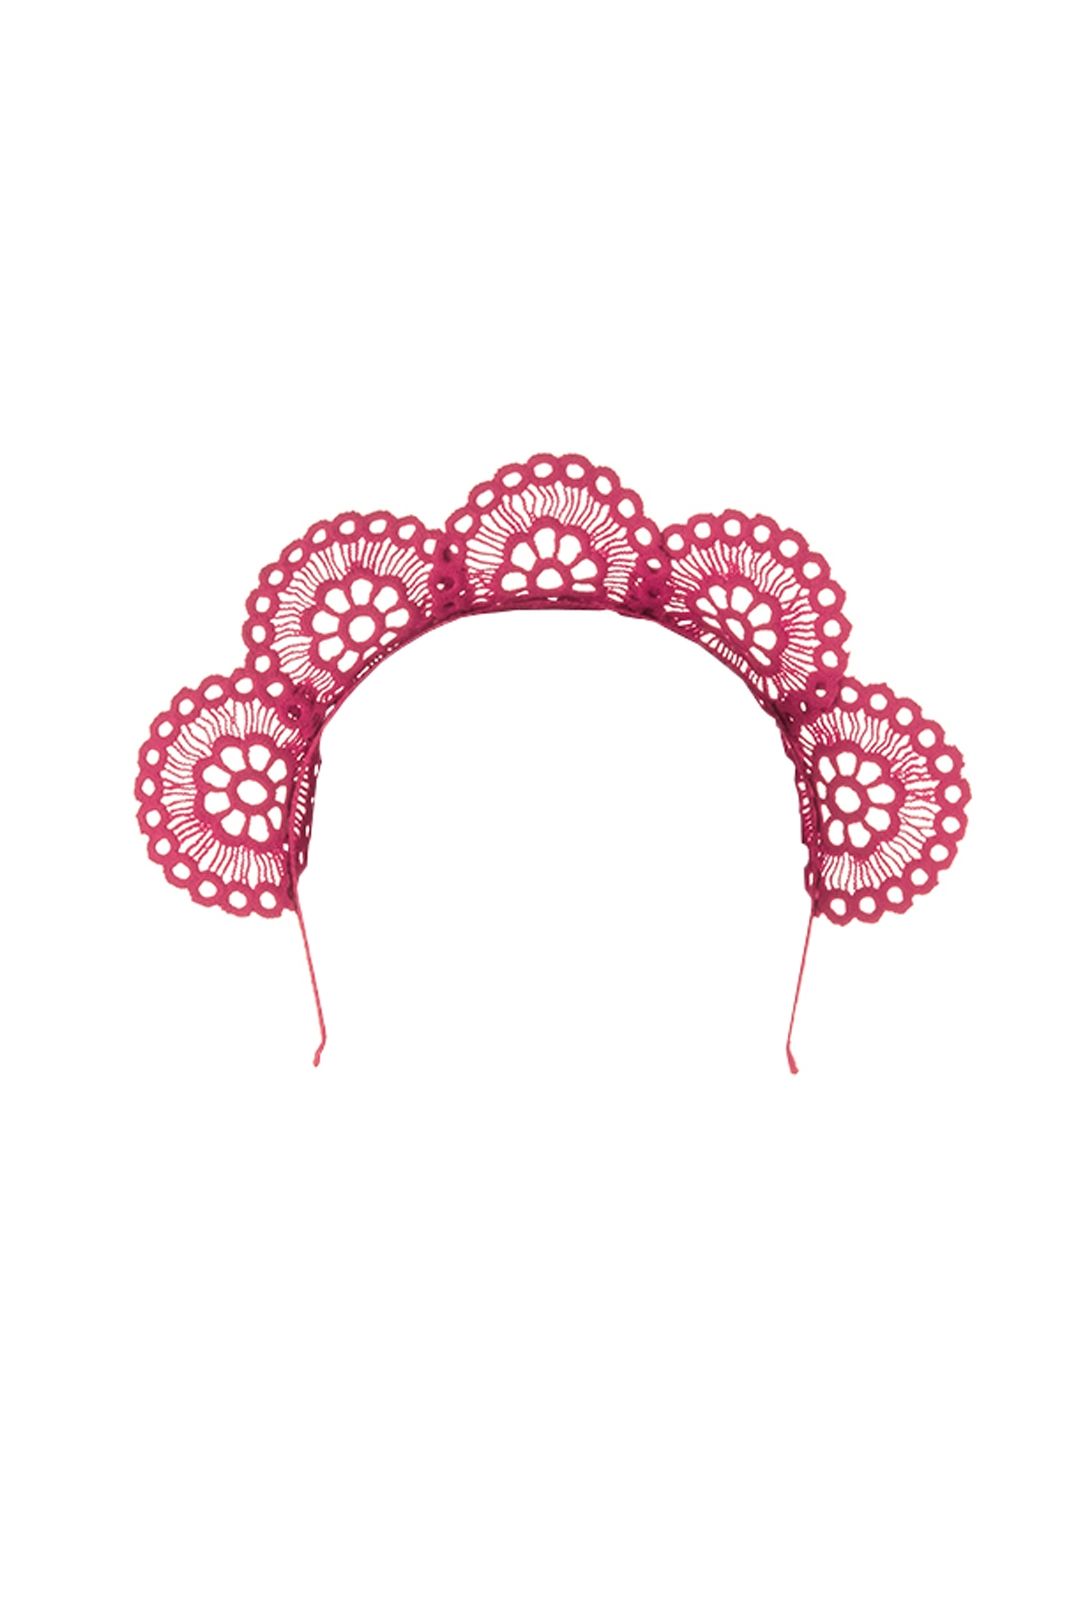 Olga Berg - Claire Lace Headband - Pink - Front